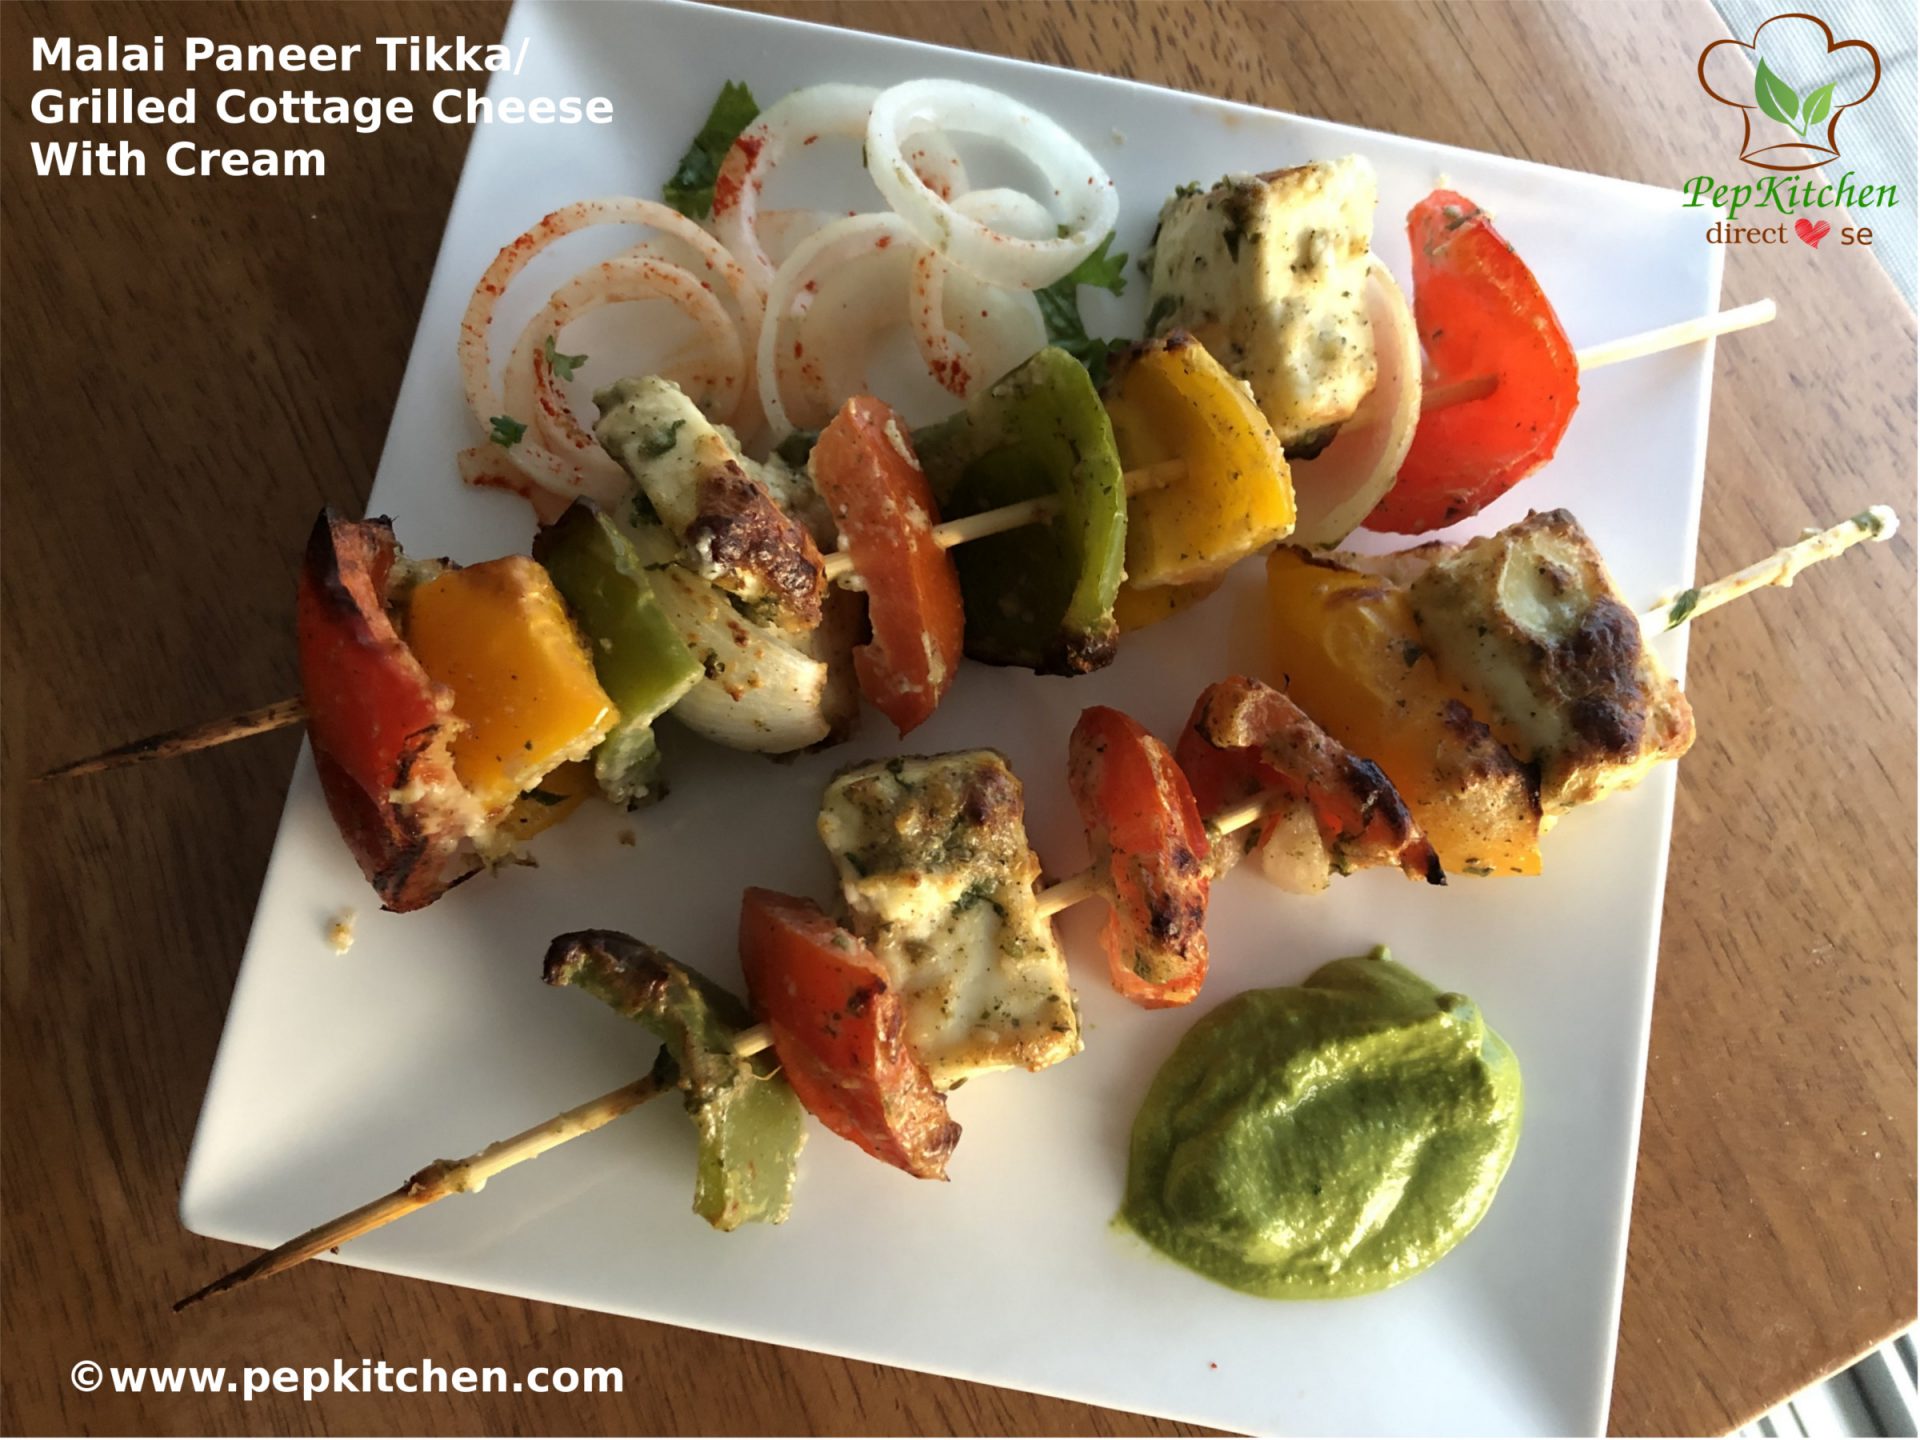 Malai Paneer Tikka / Grilled Cottage Cheese With Cream